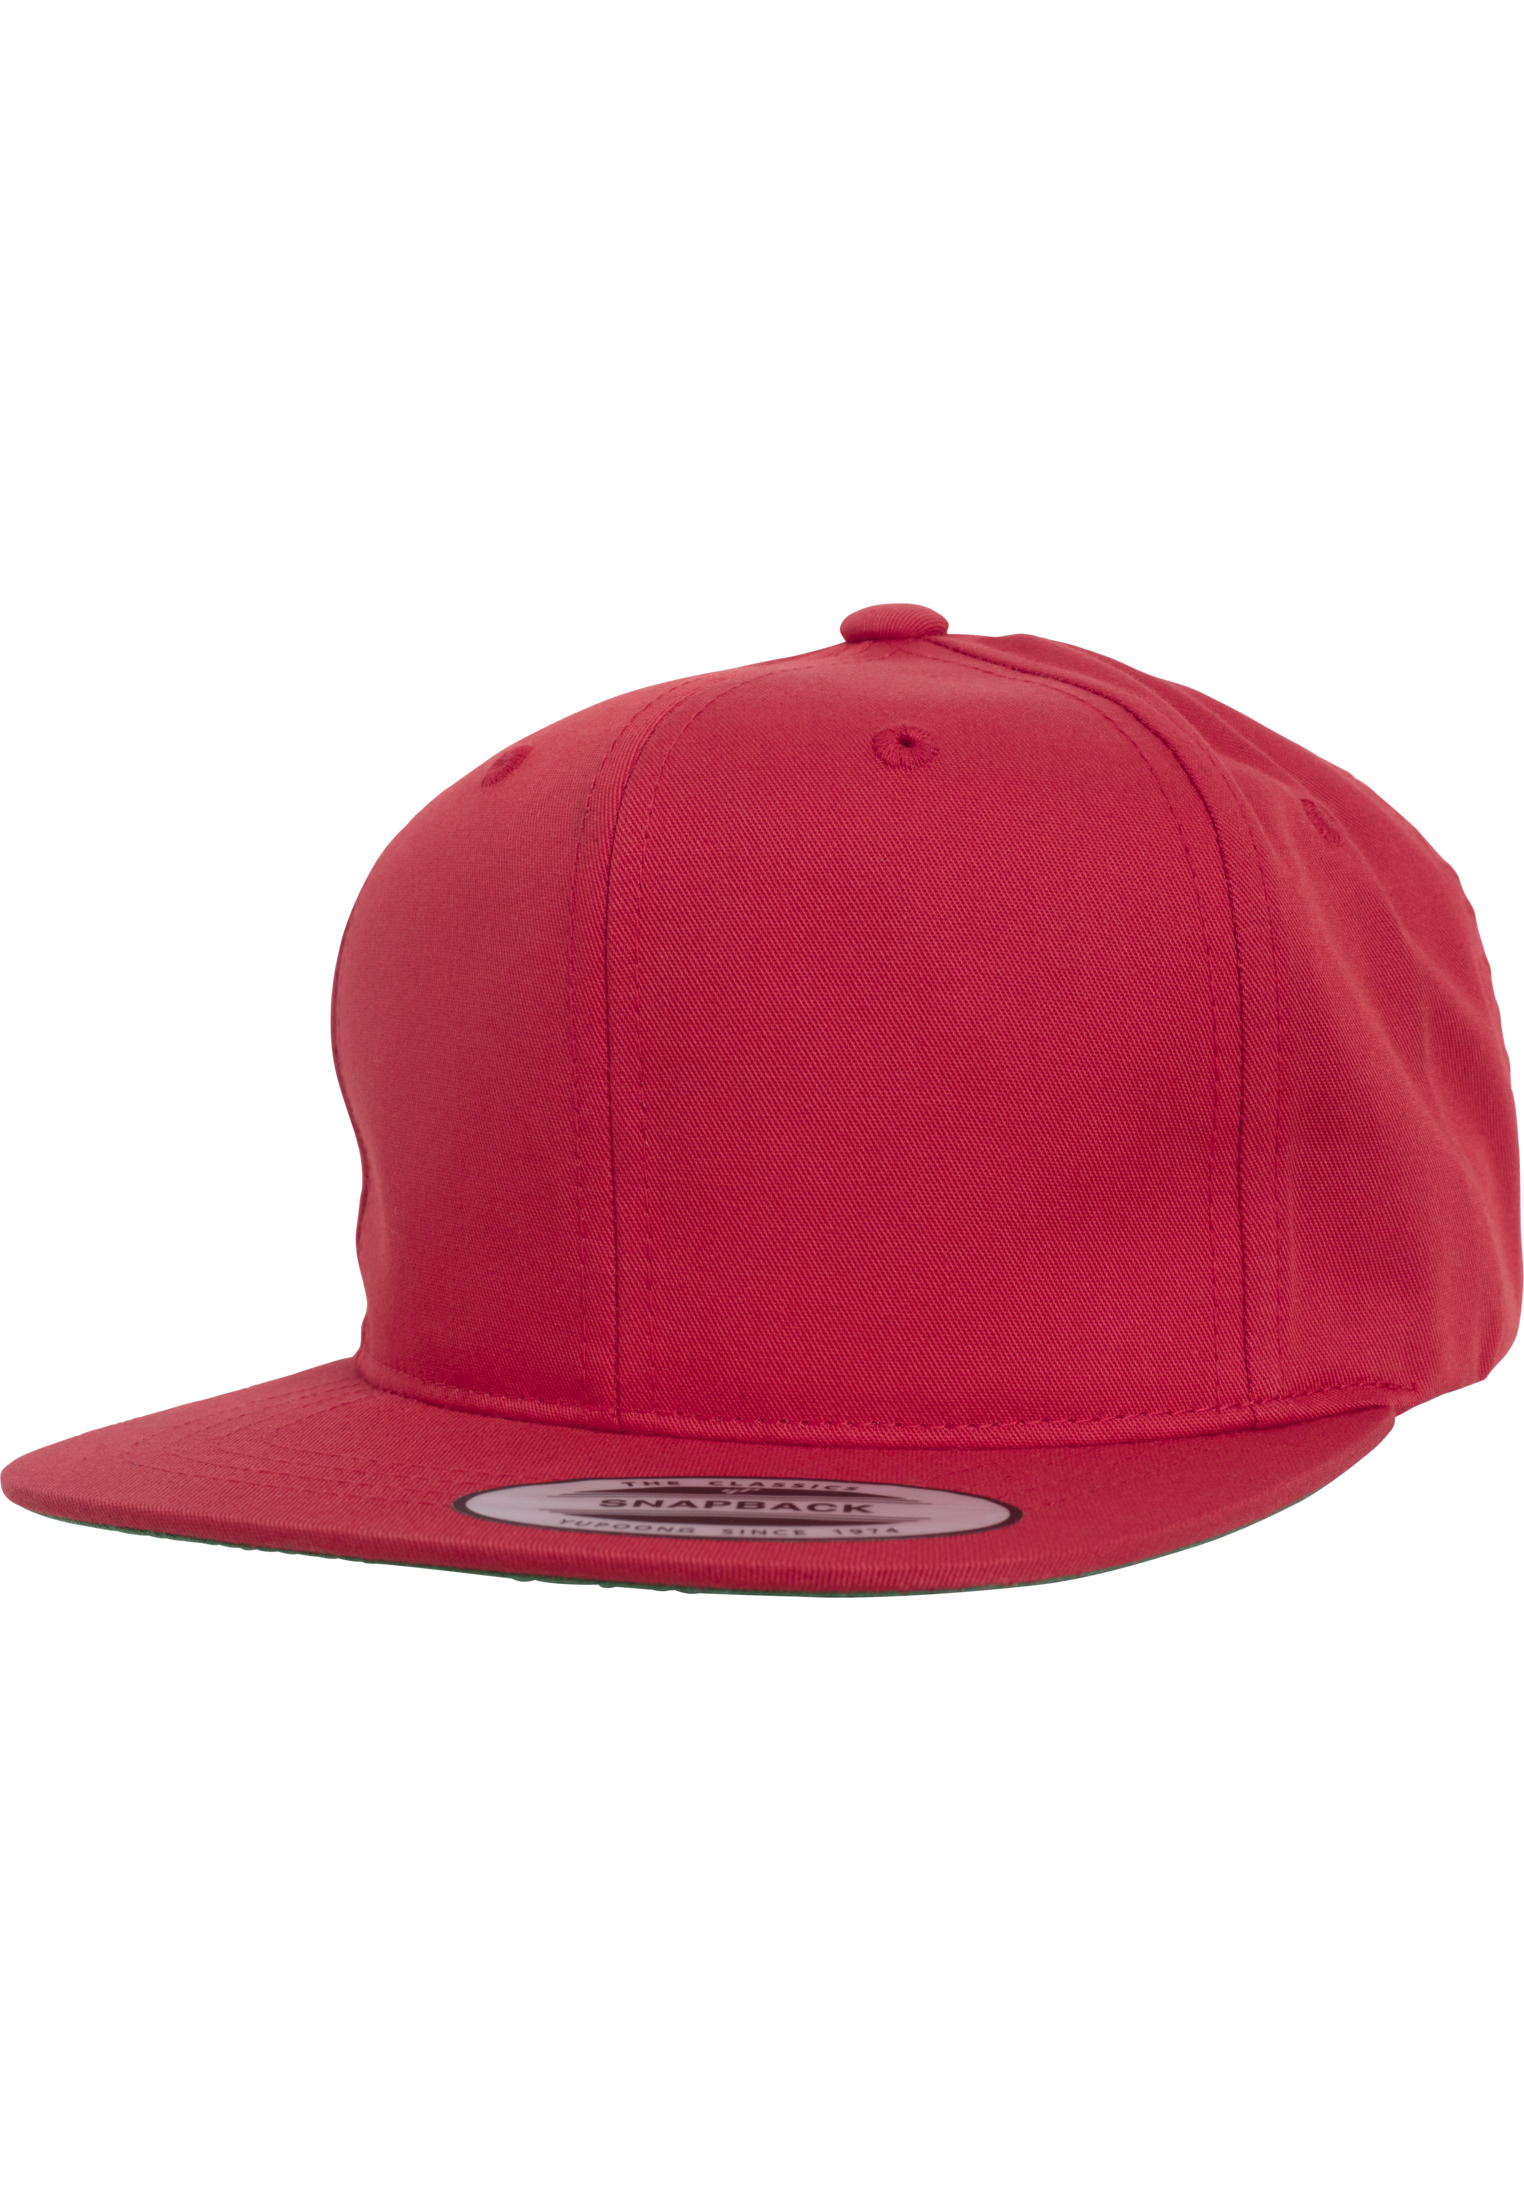 Kids Pro-Style Twill Snapback Youth Cap in Farbe red